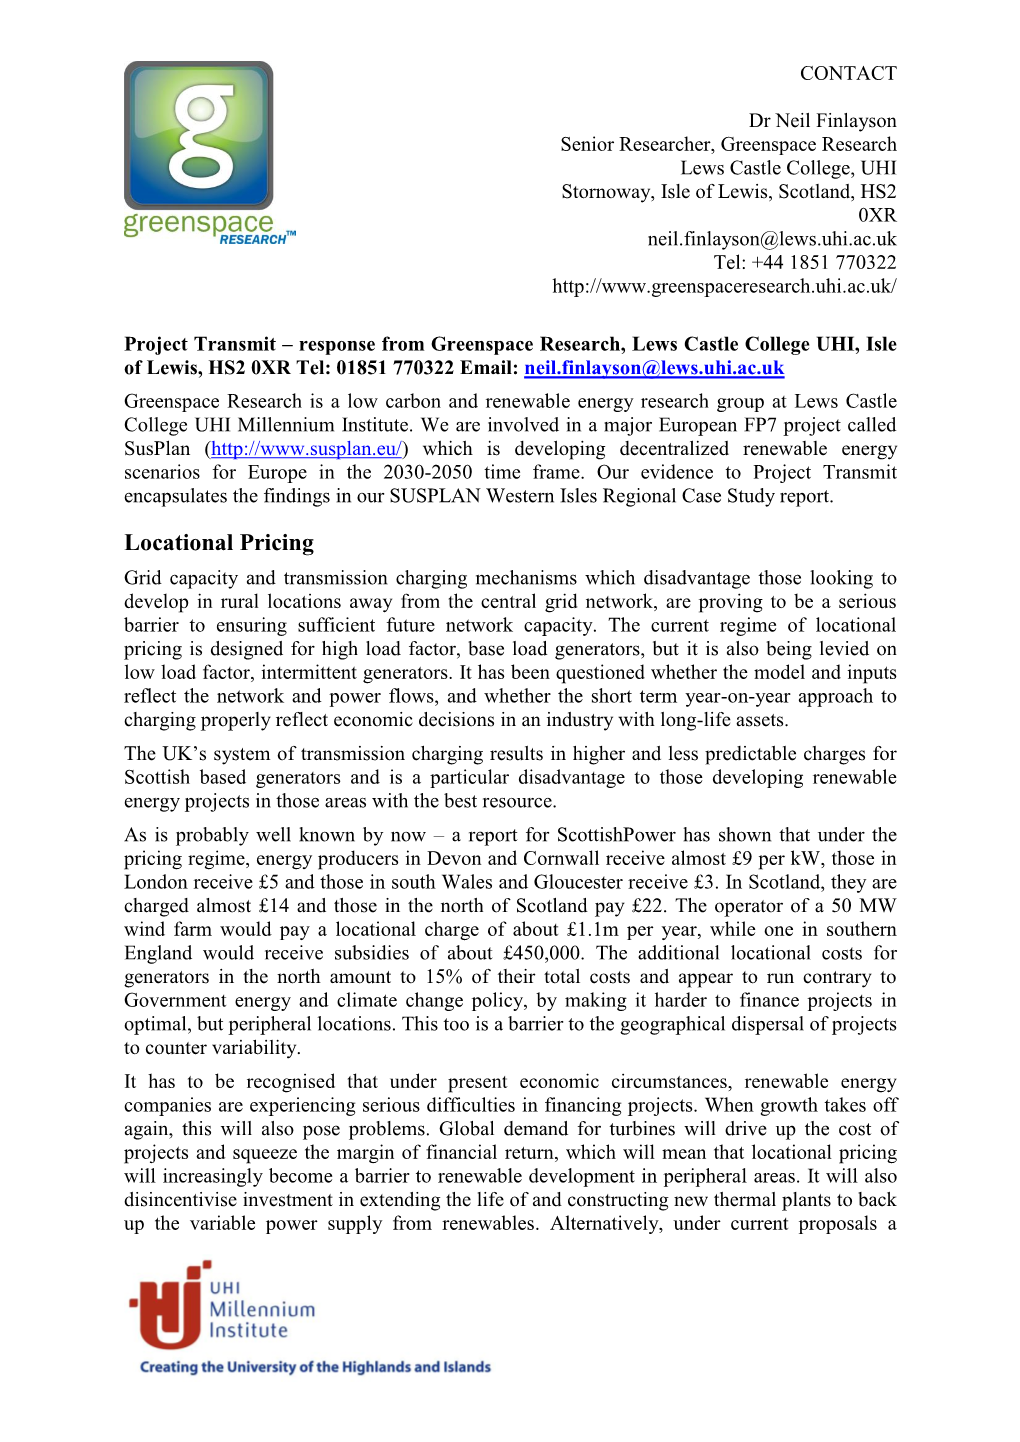 Project Transmit – Response from Greenspace Research, Lews Castle College UHI, Isle of Lewis, HS2 0XR Tel: 01851 770322 Email